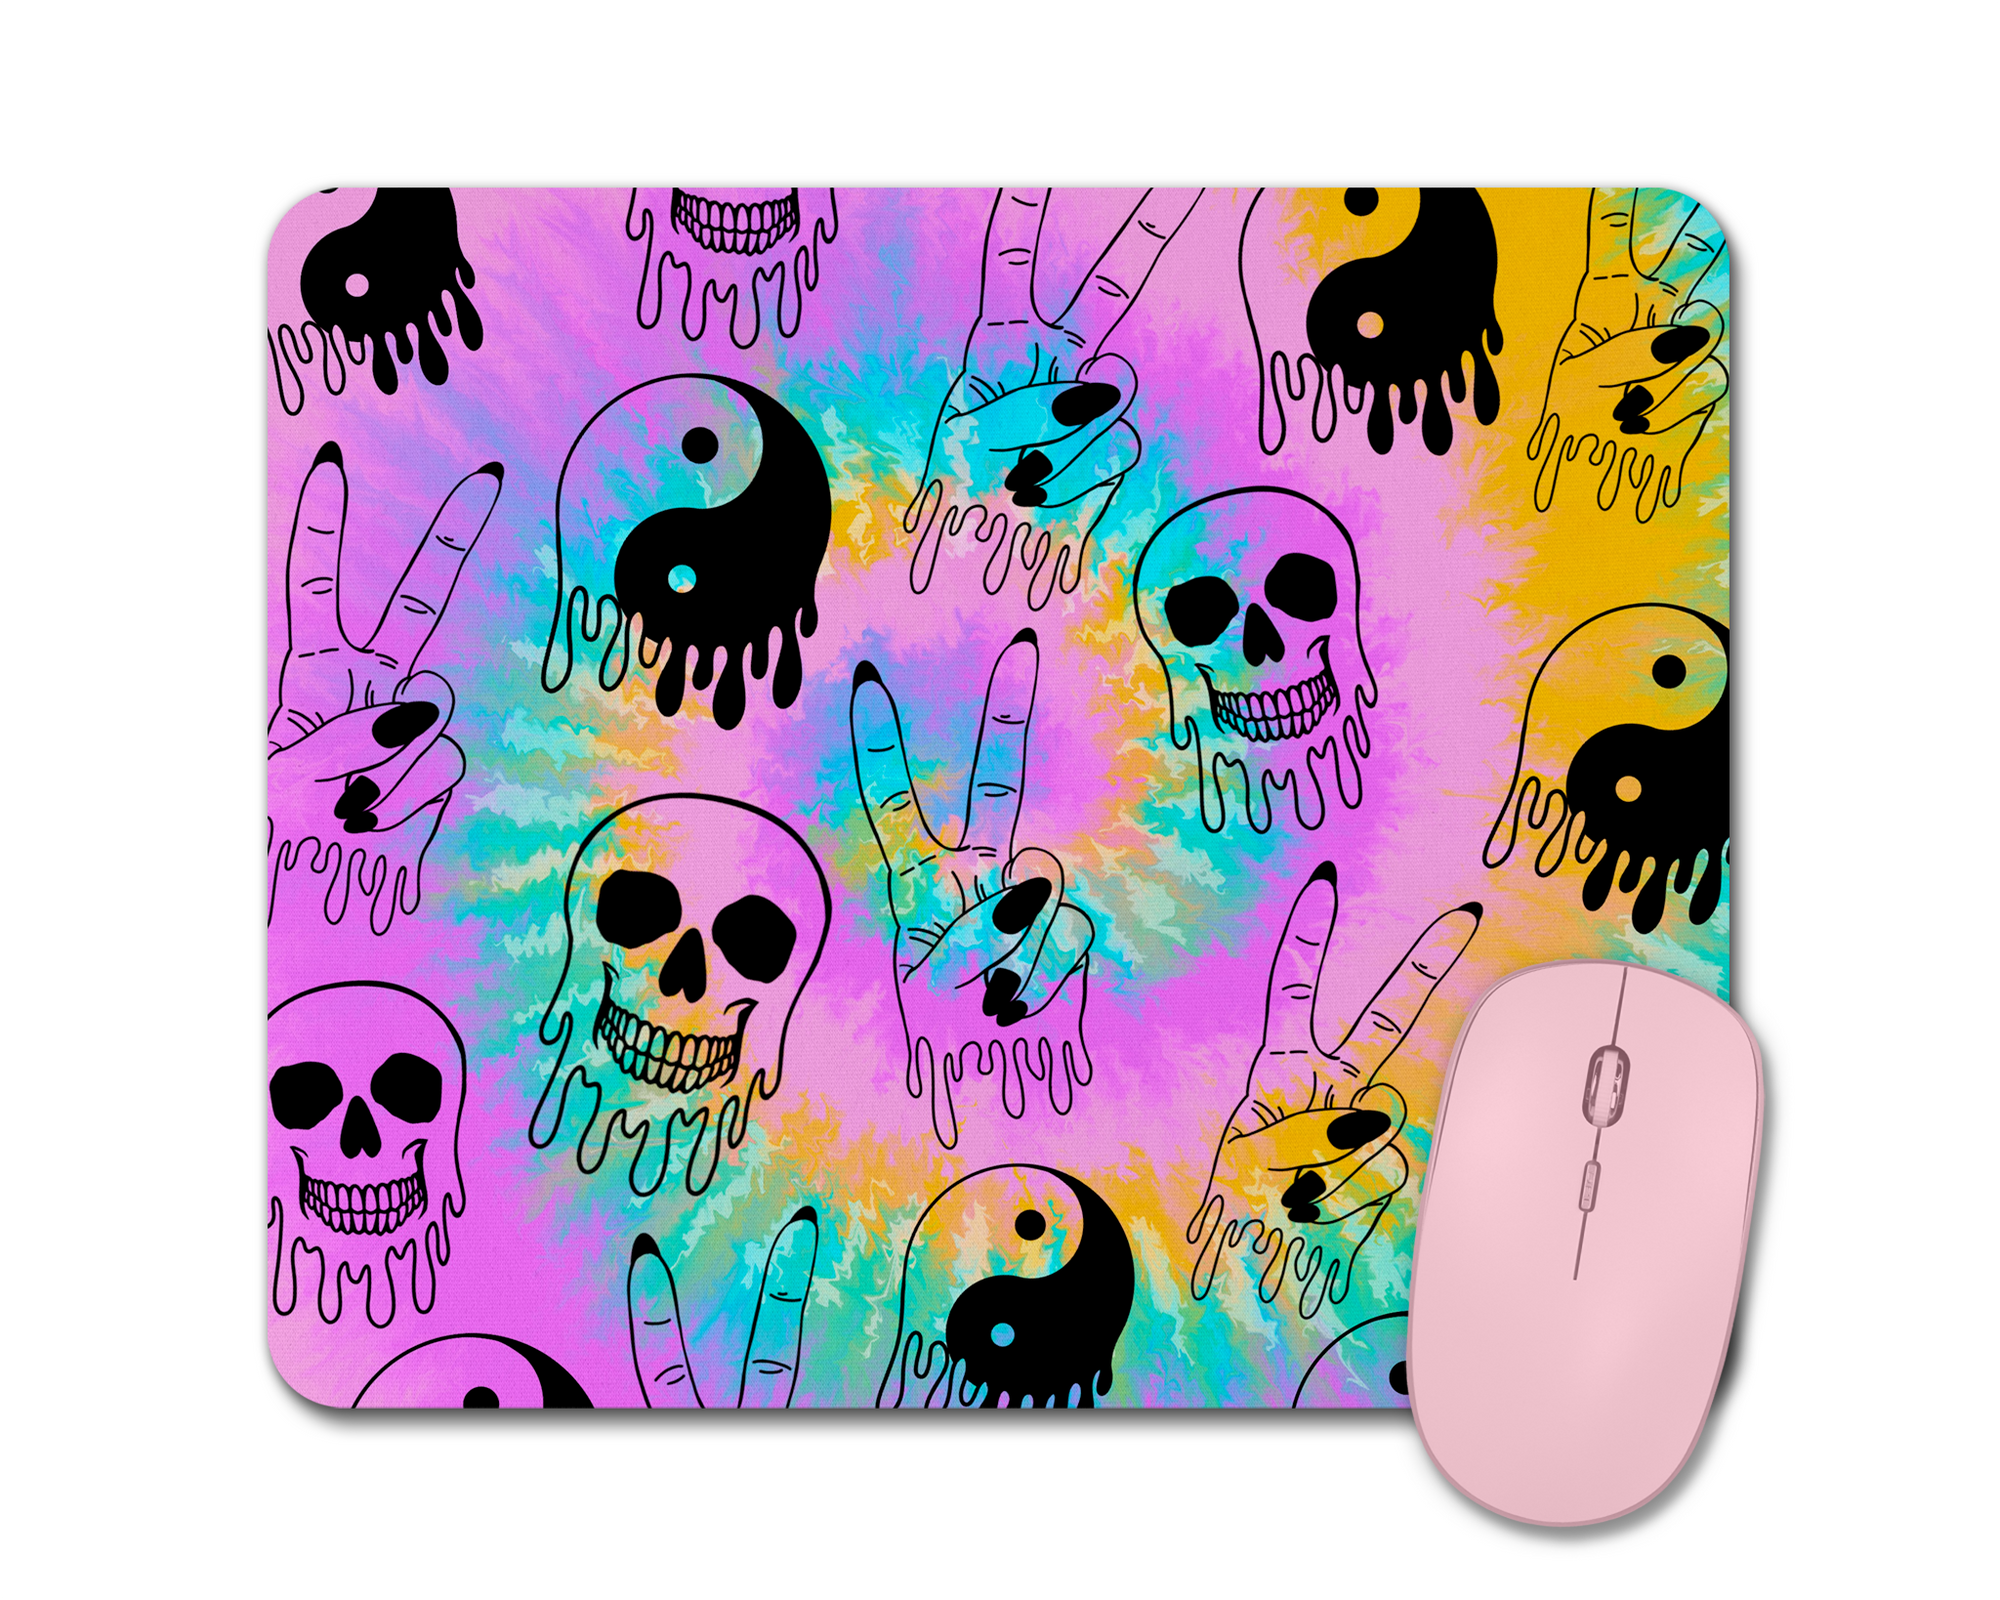 Drippy Tie Dye Mouse Pad